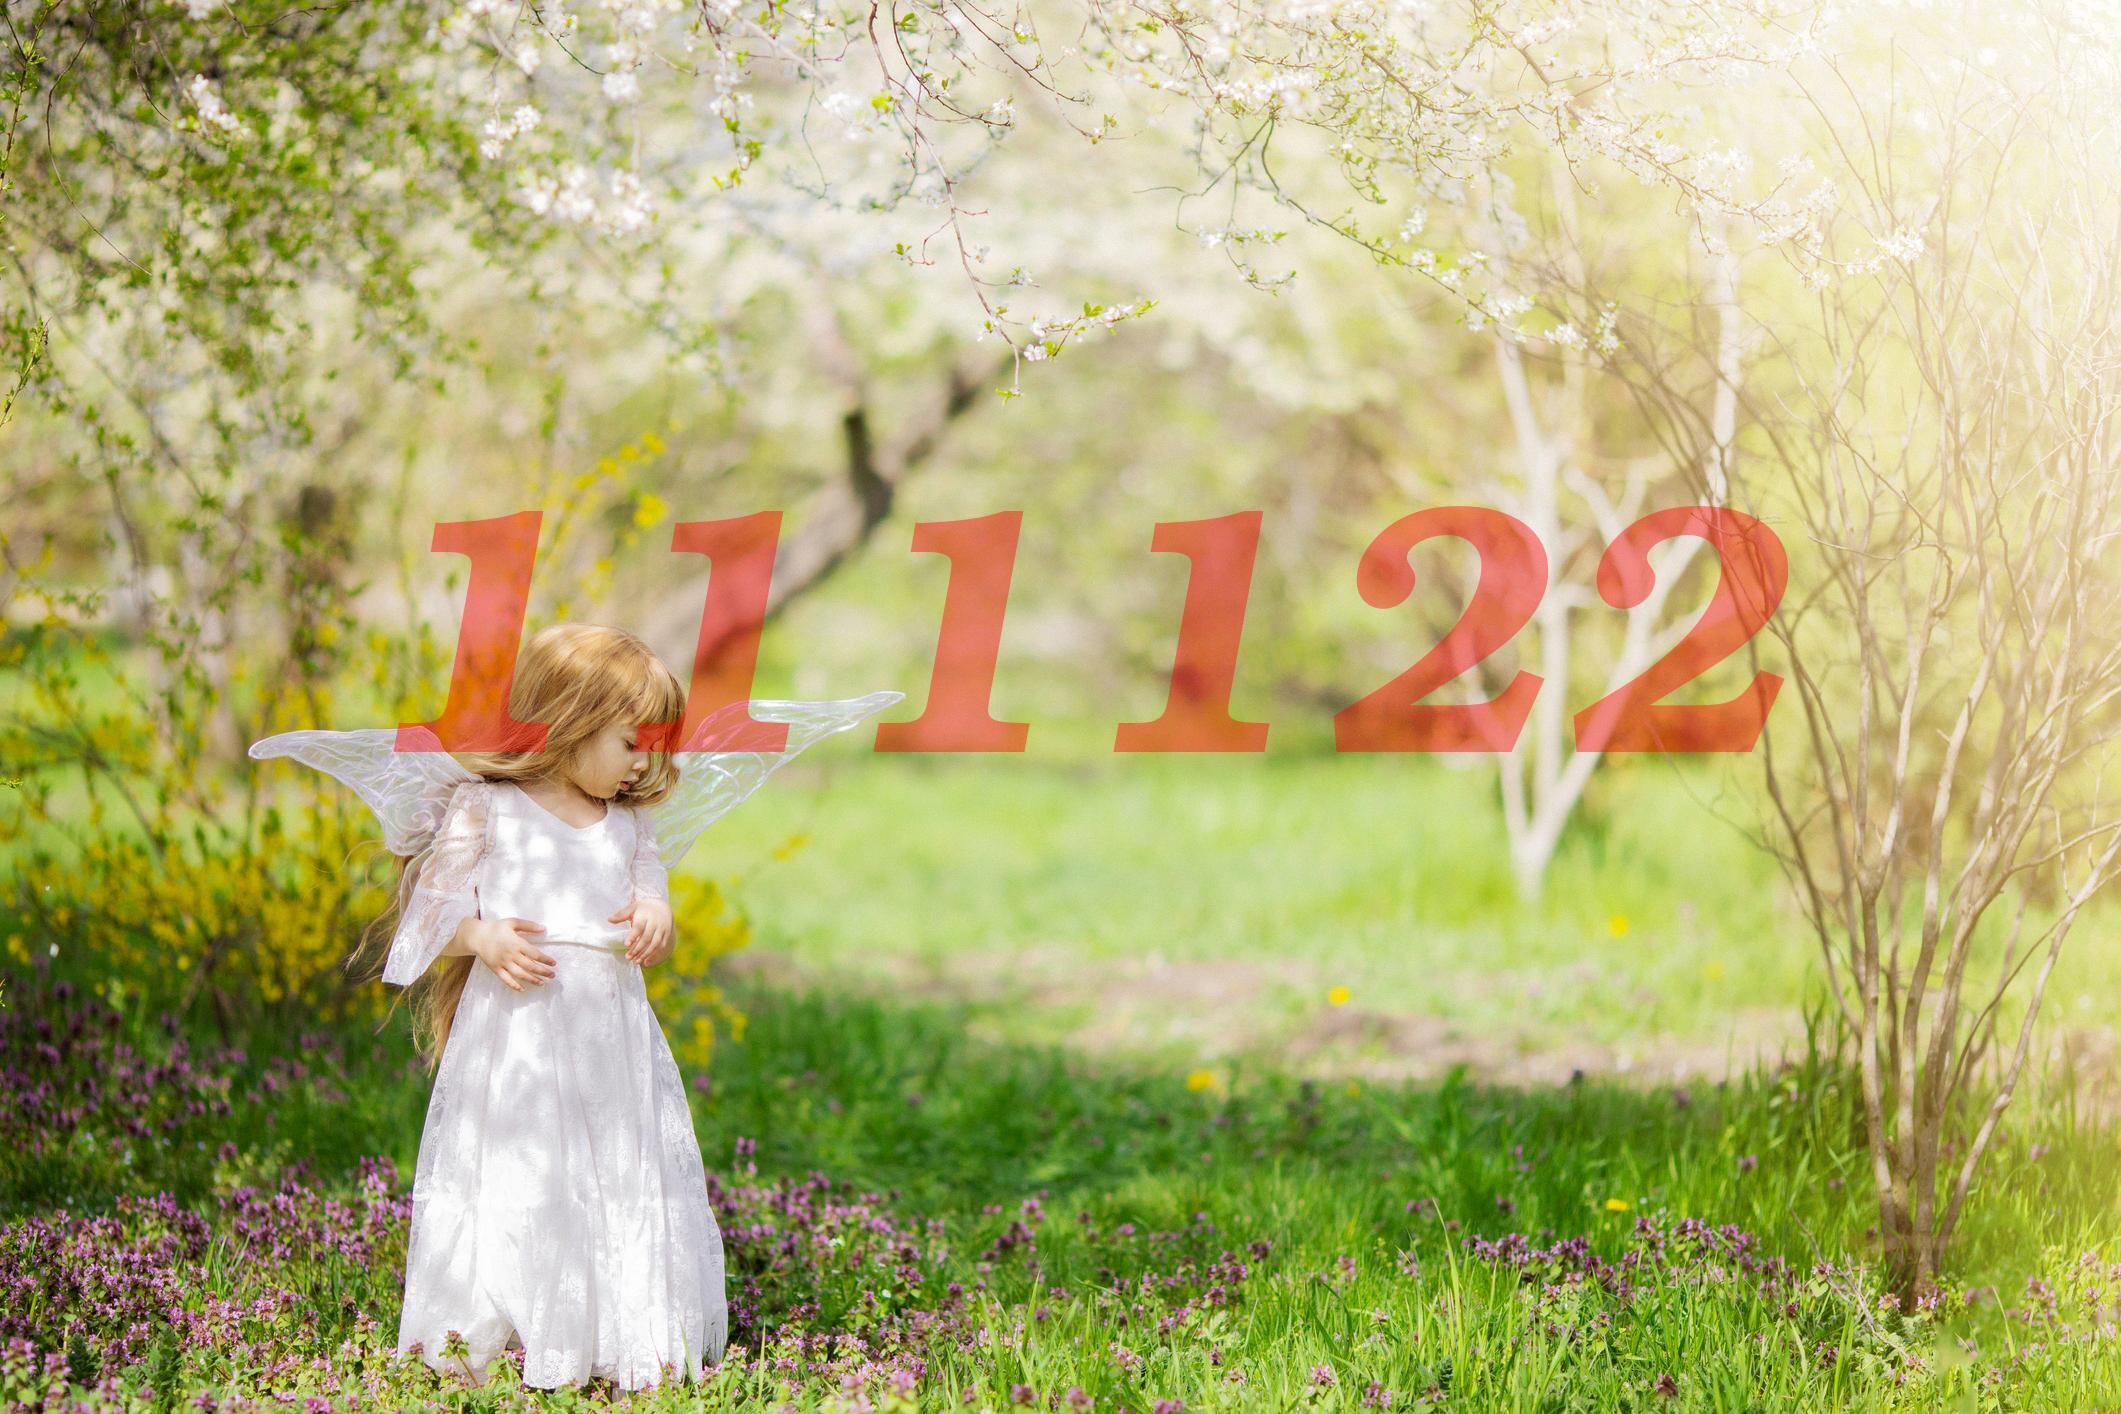 Angel Number 111122 Numerology Meaning